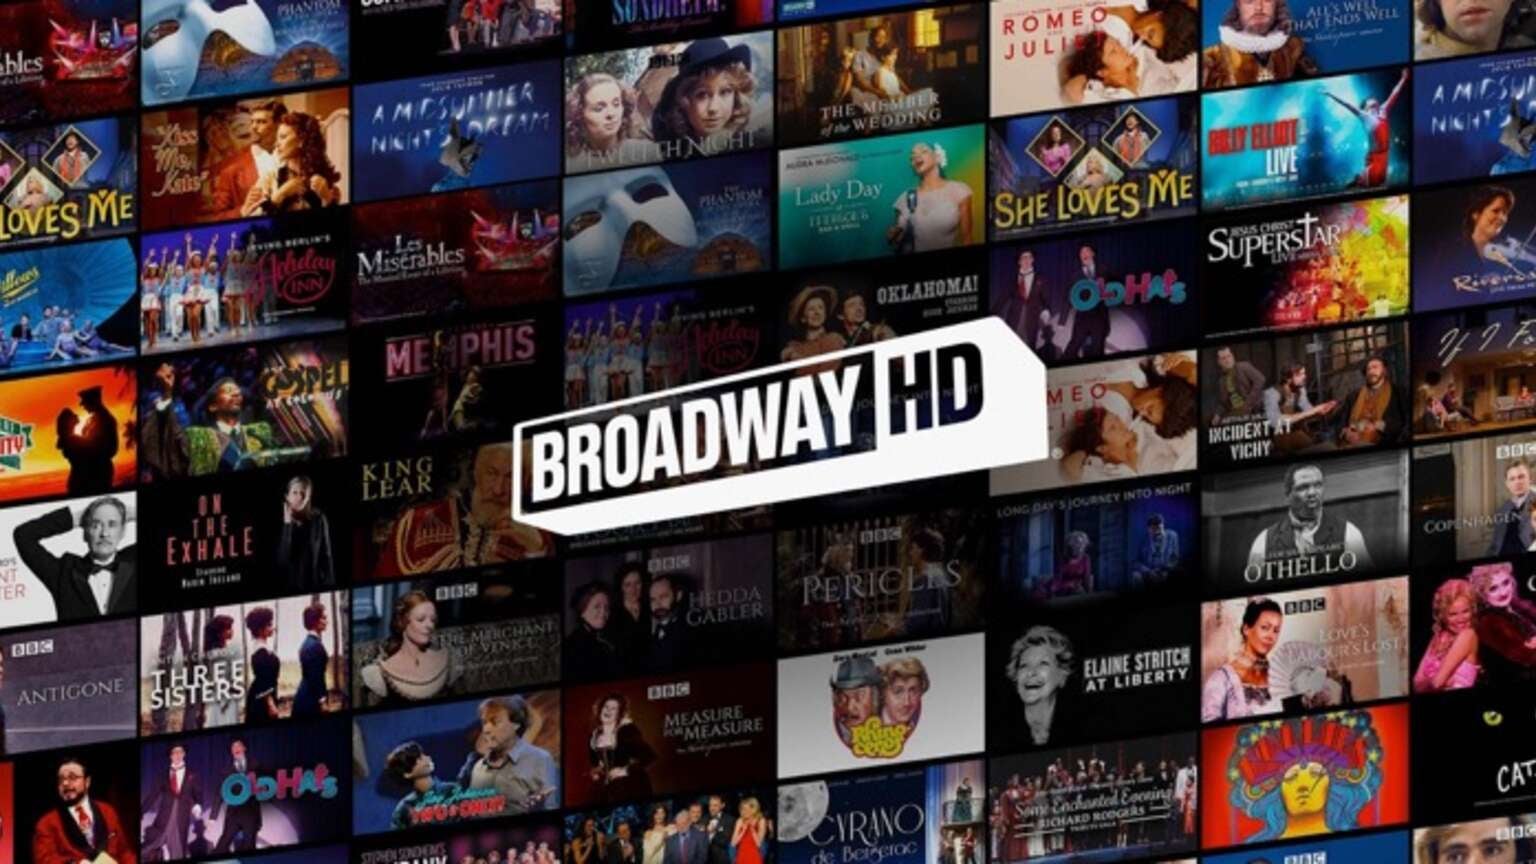 BroadwayHD is Netflix for Broadway Shows to Bring Live Theater into